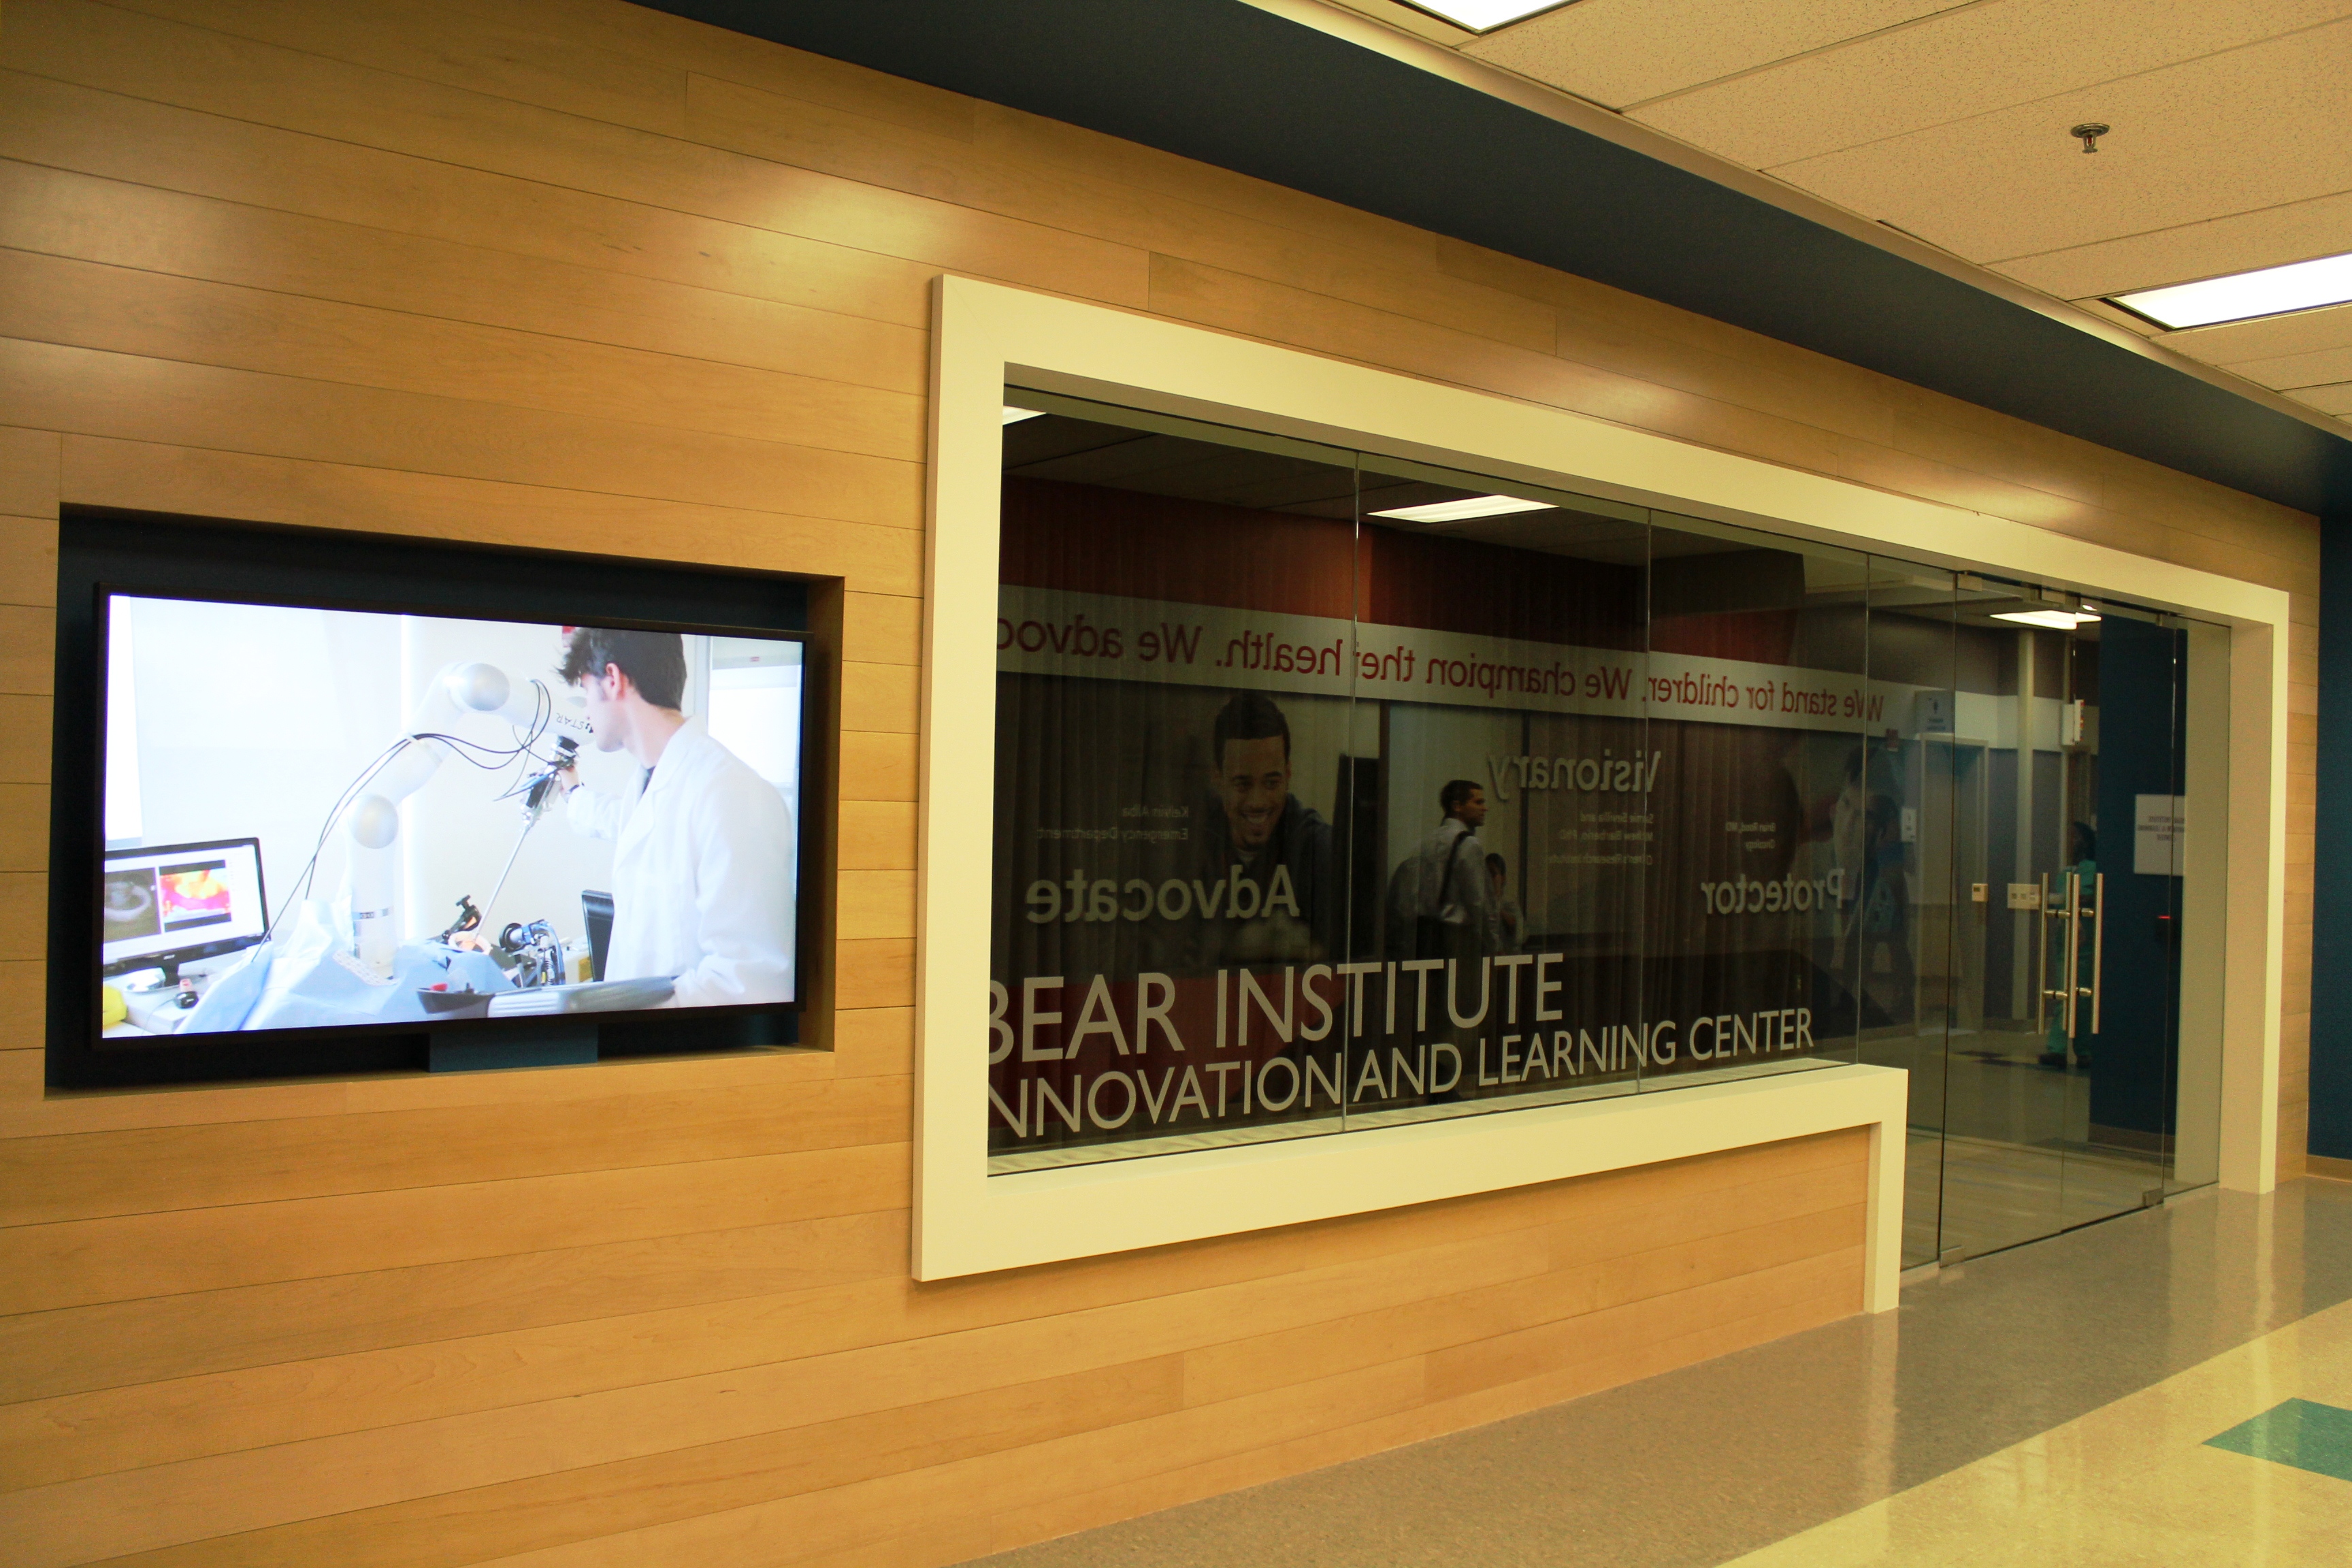 Innovation and Learning Center